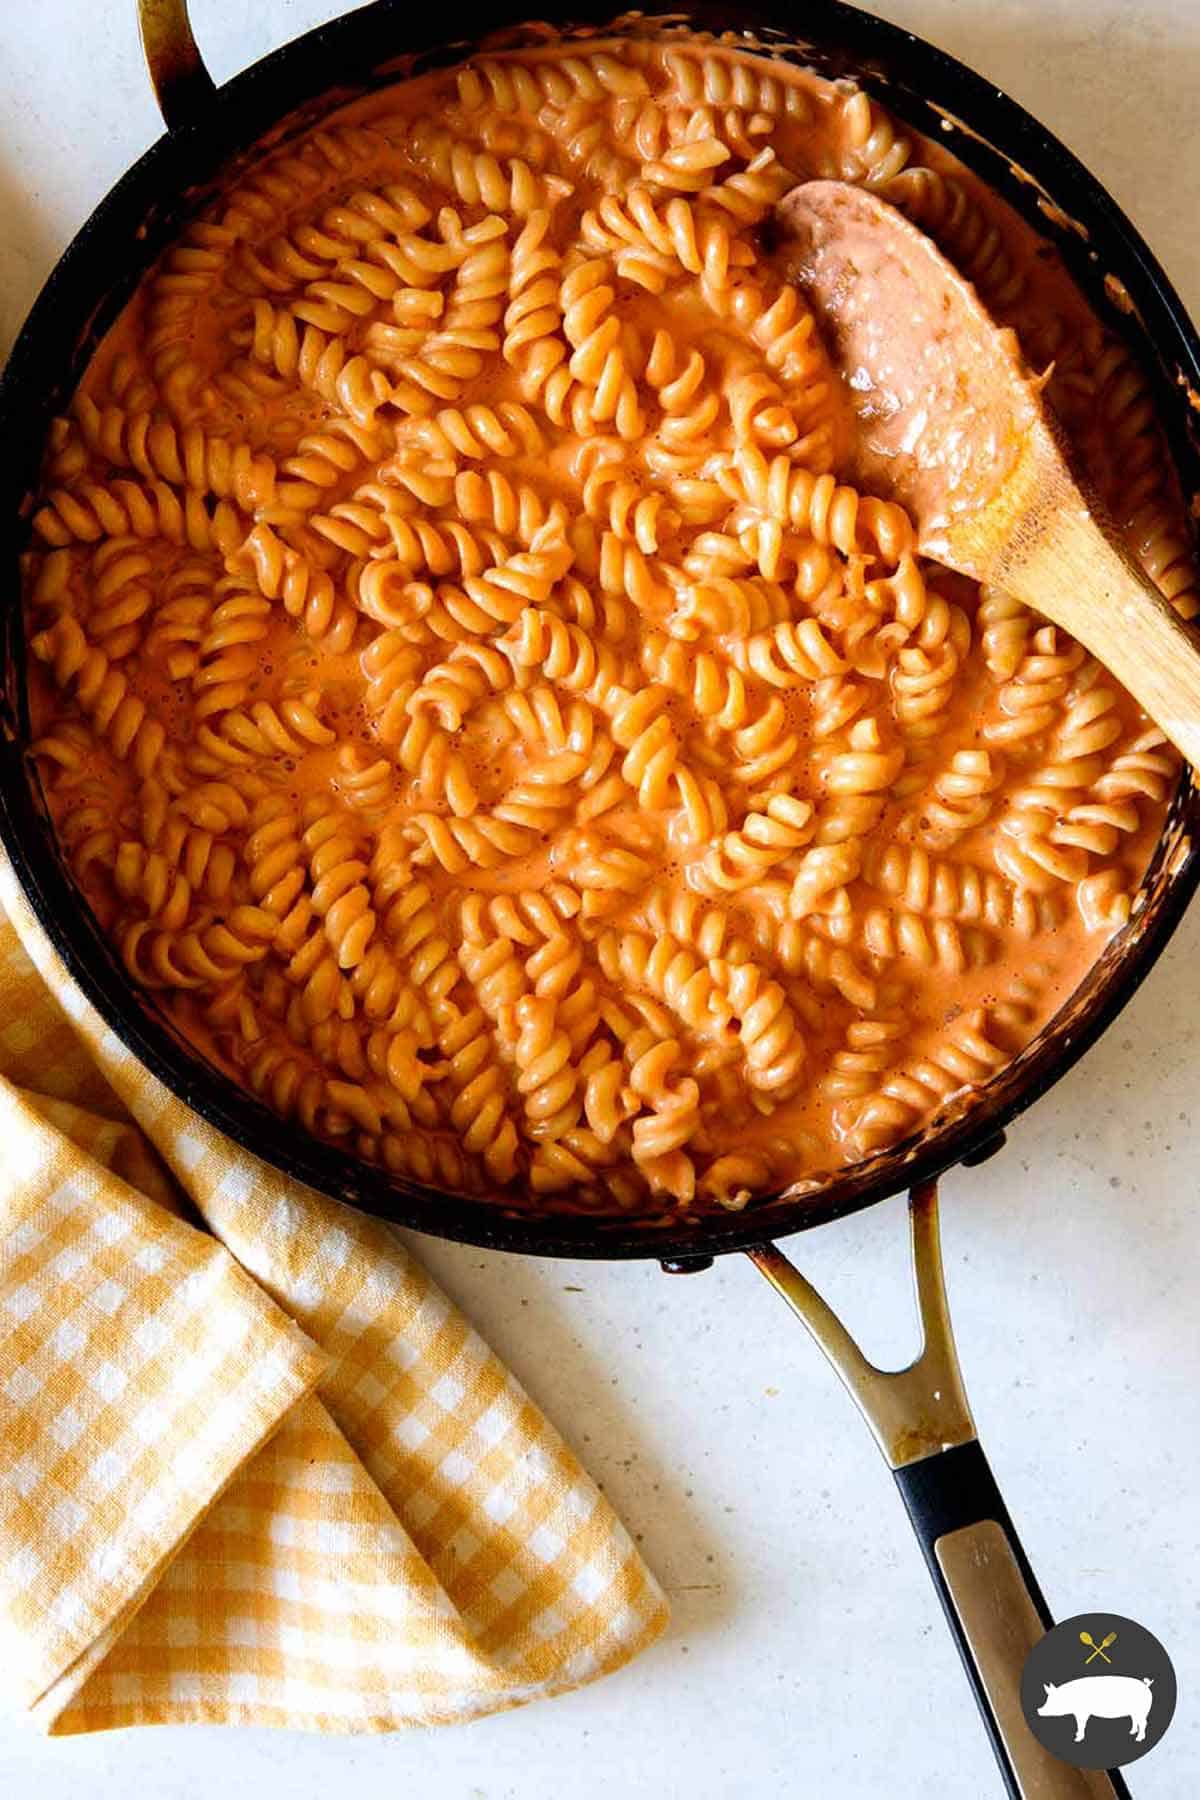 A skillet full of vodka sauce and pasta.